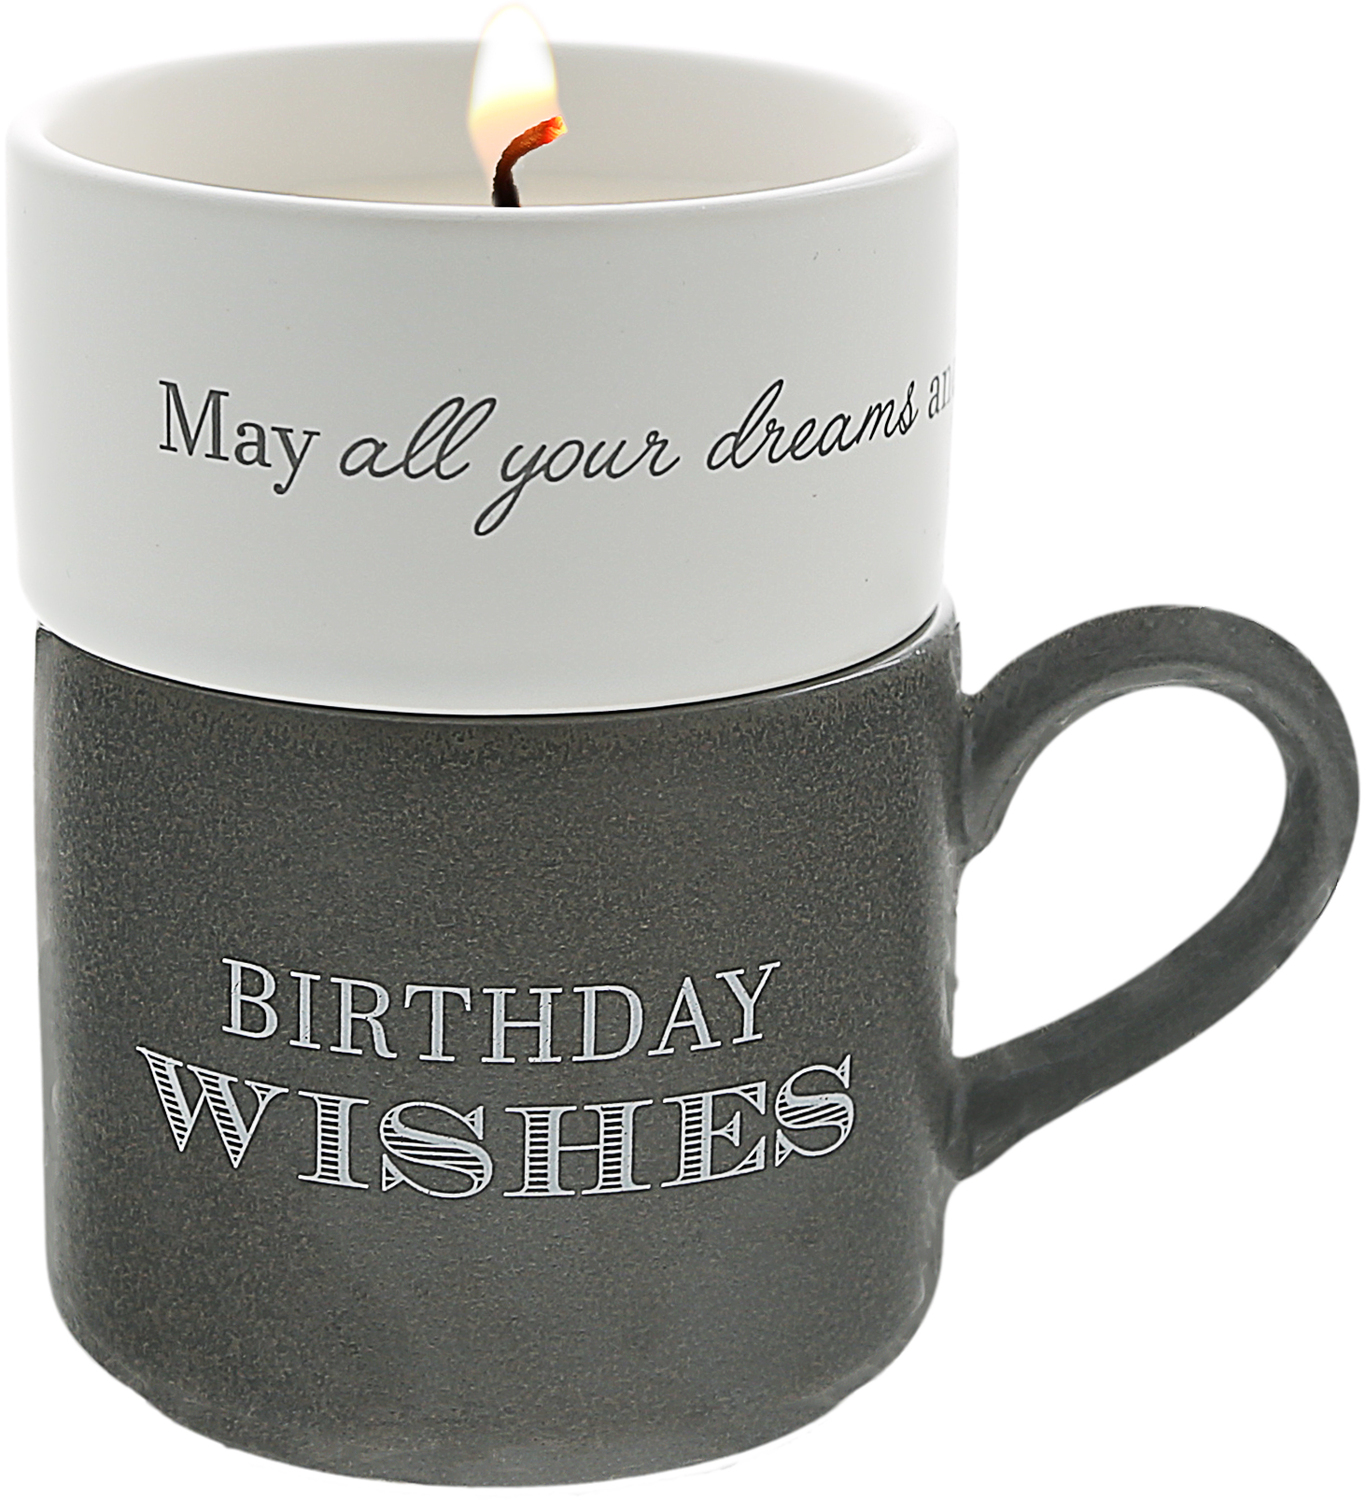 Birthday by Filled with Warmth - Birthday - Stacking Mug and Candle Set
100% Soy Wax Scent: Tranquility